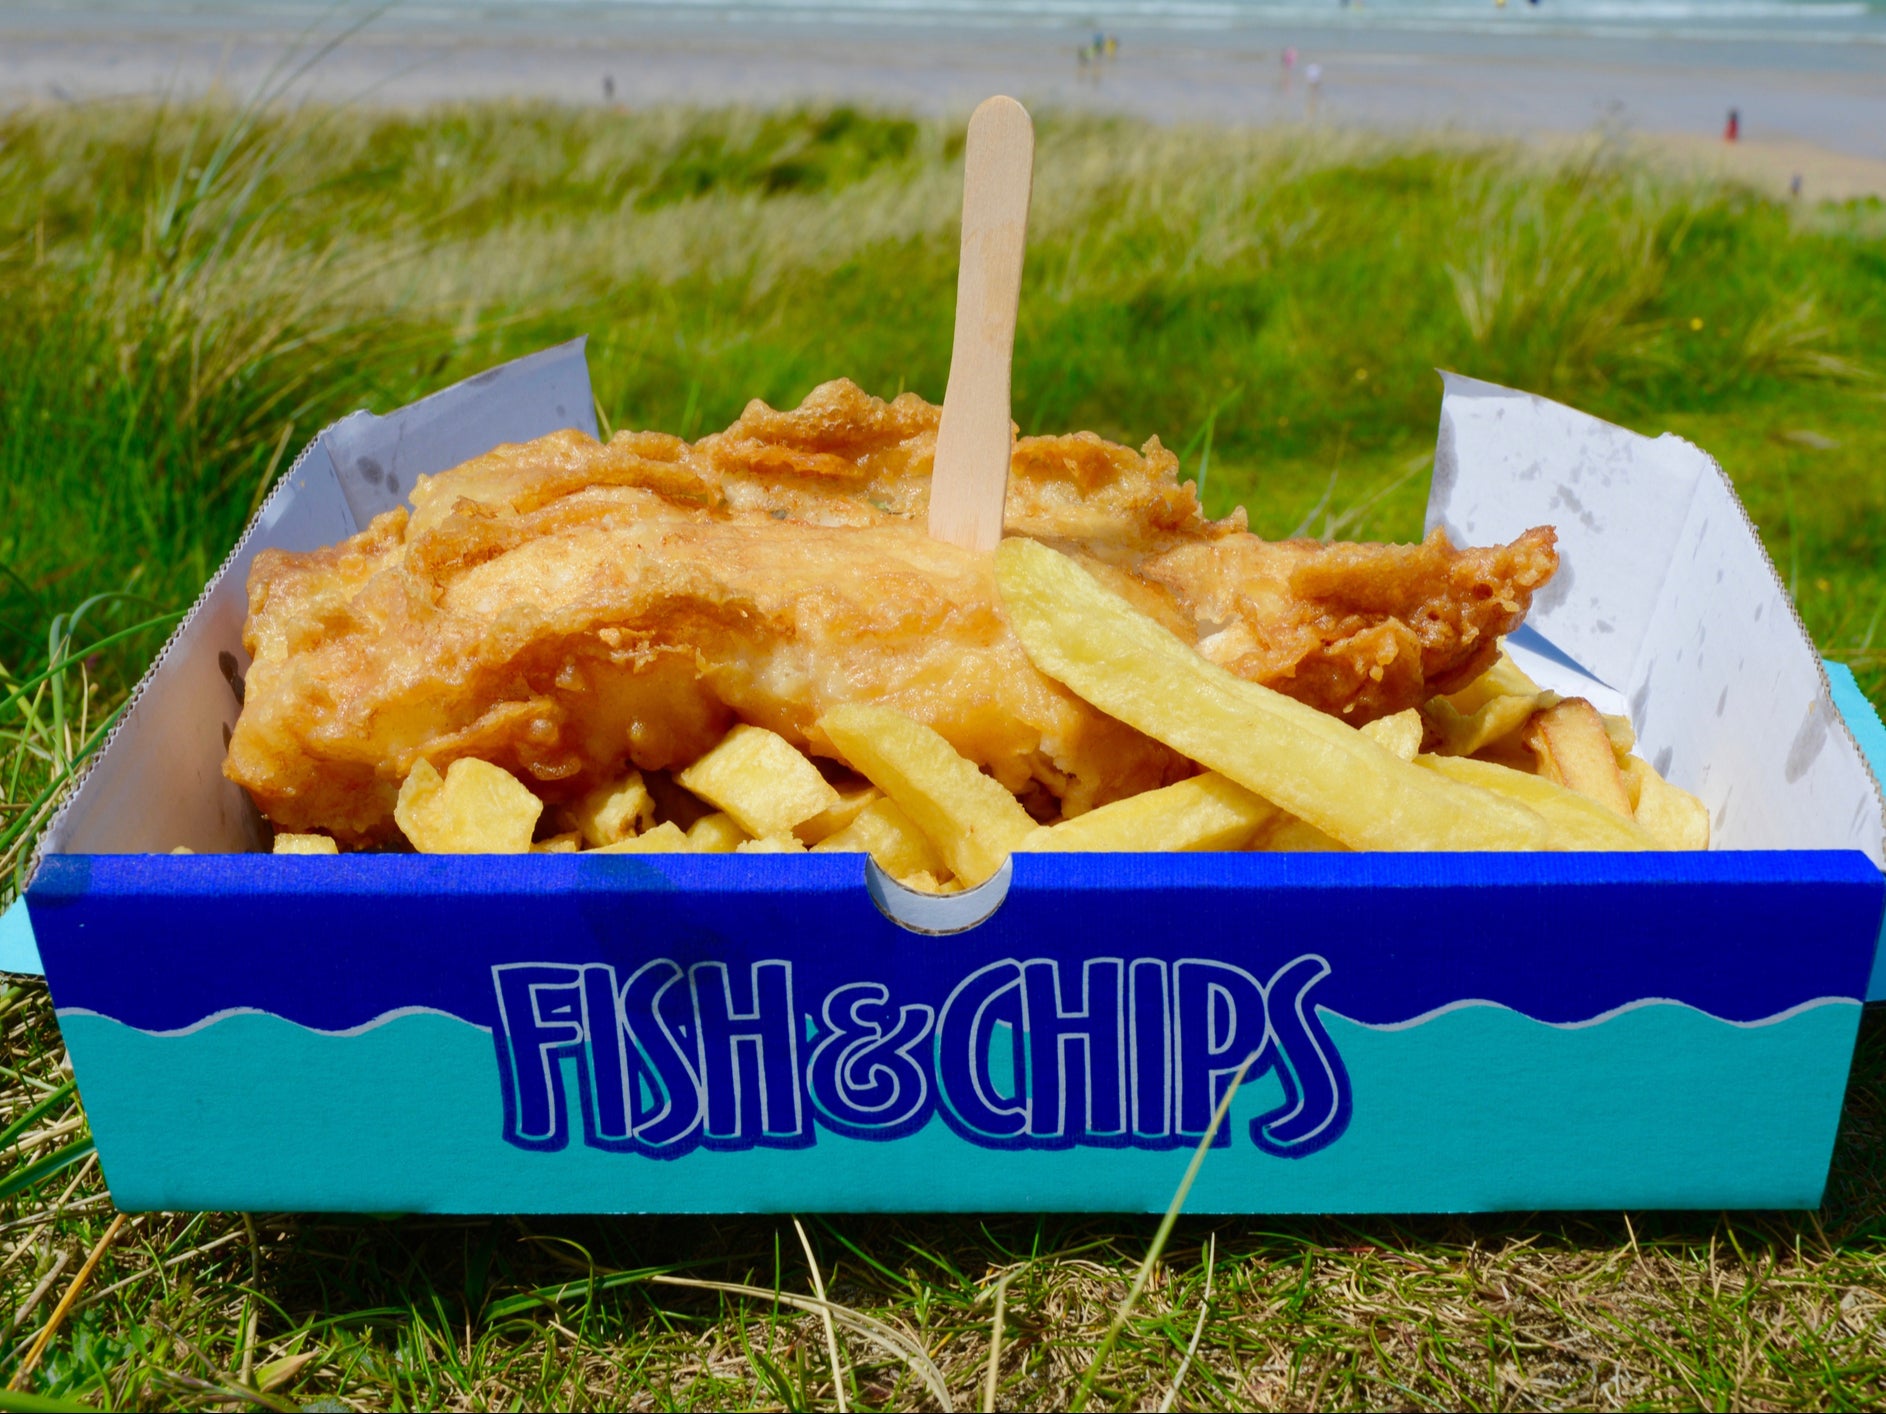 The average price of fish and chips has risen by 19 per cent, according to the ONS